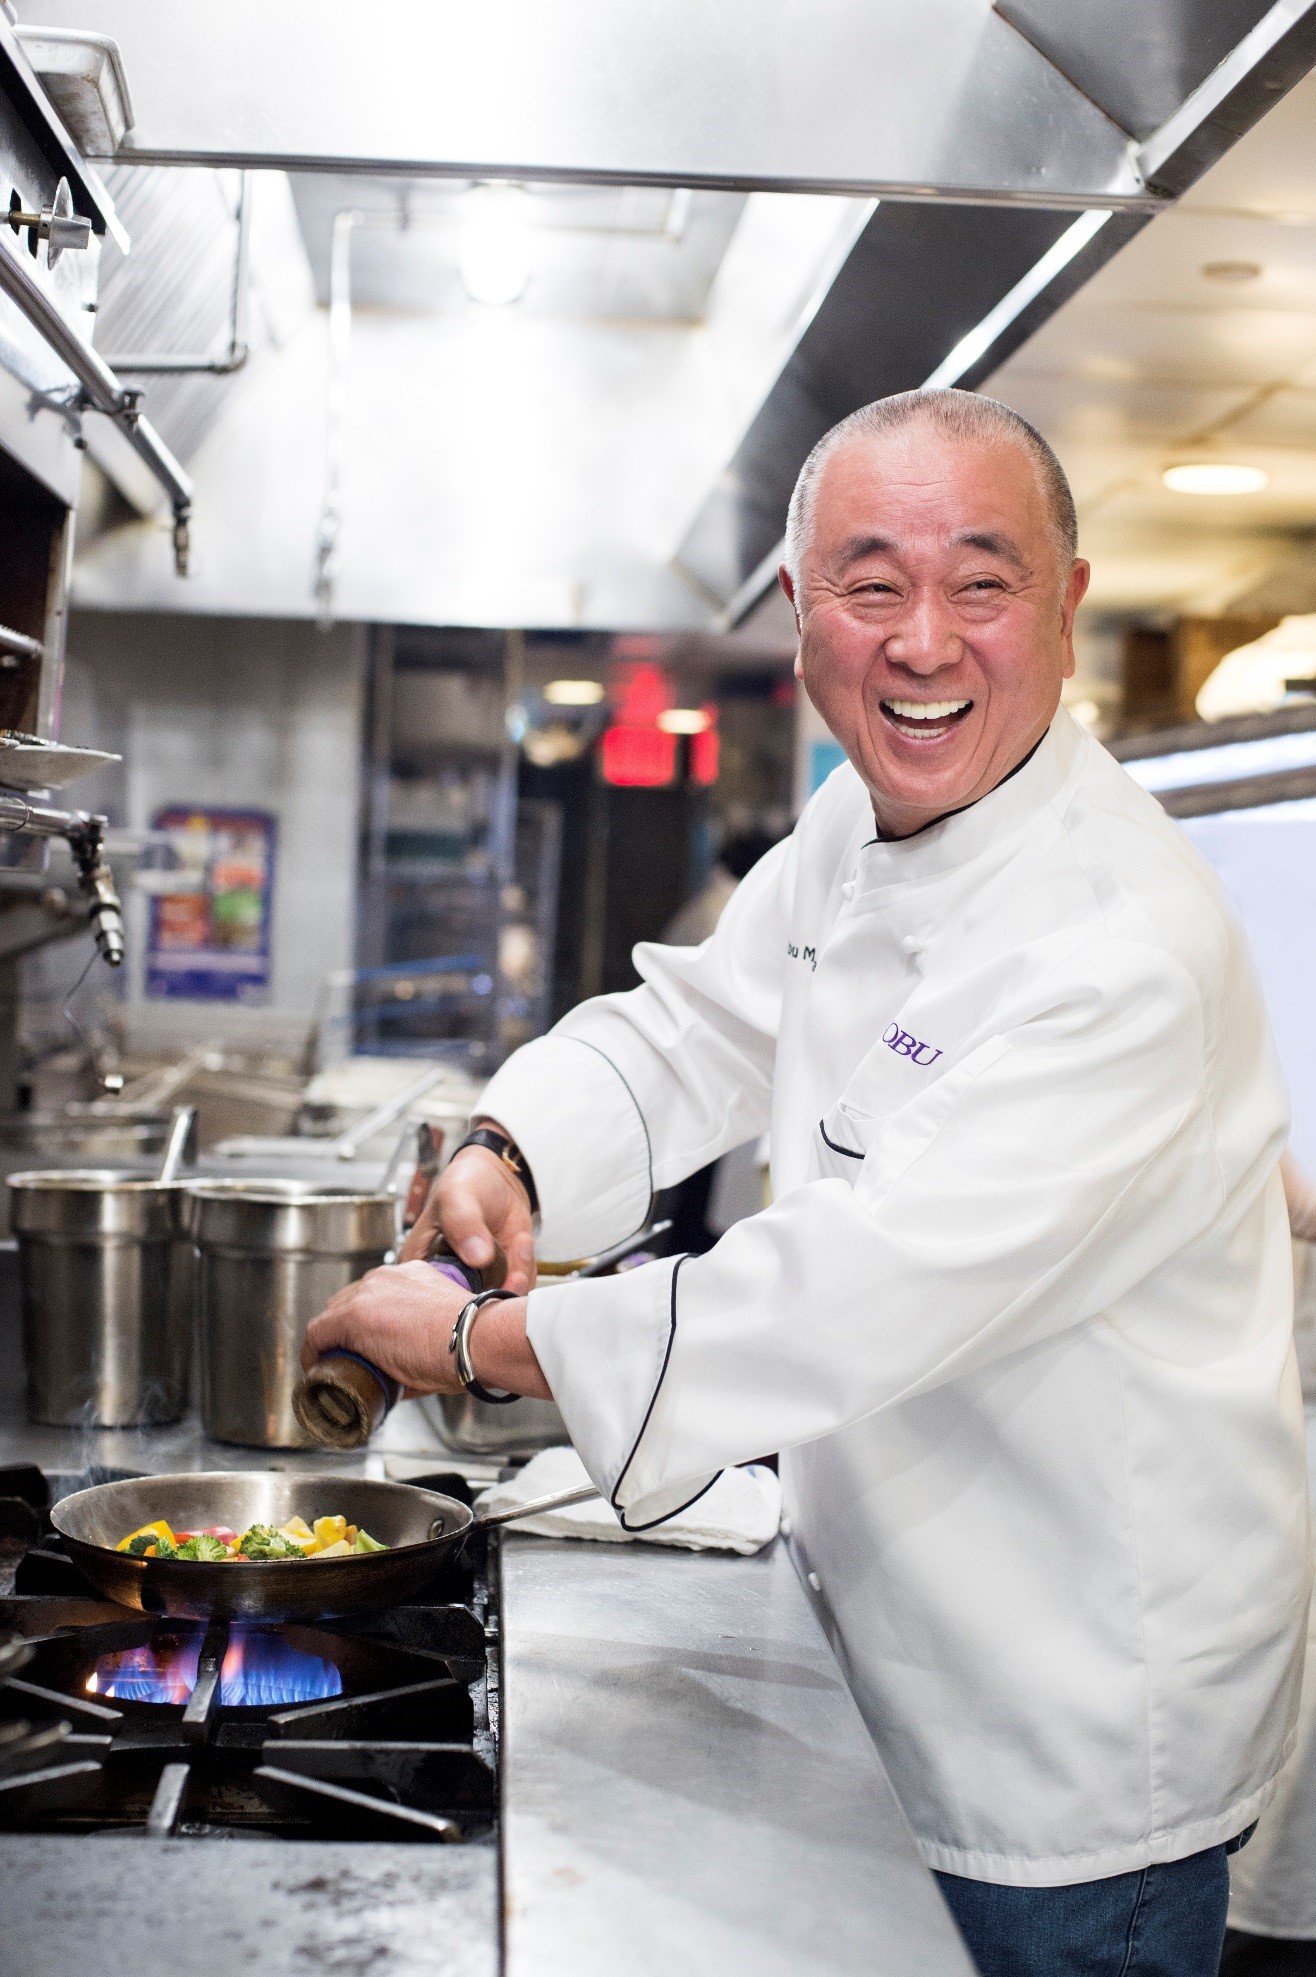     Chef Nobu in Tokyo "Nobu Week"  Chef Nobu's schedule for Tokyo has unfortunately been postponed until further notice due to the current travel restrictions.&nbsp;&nbsp;。 